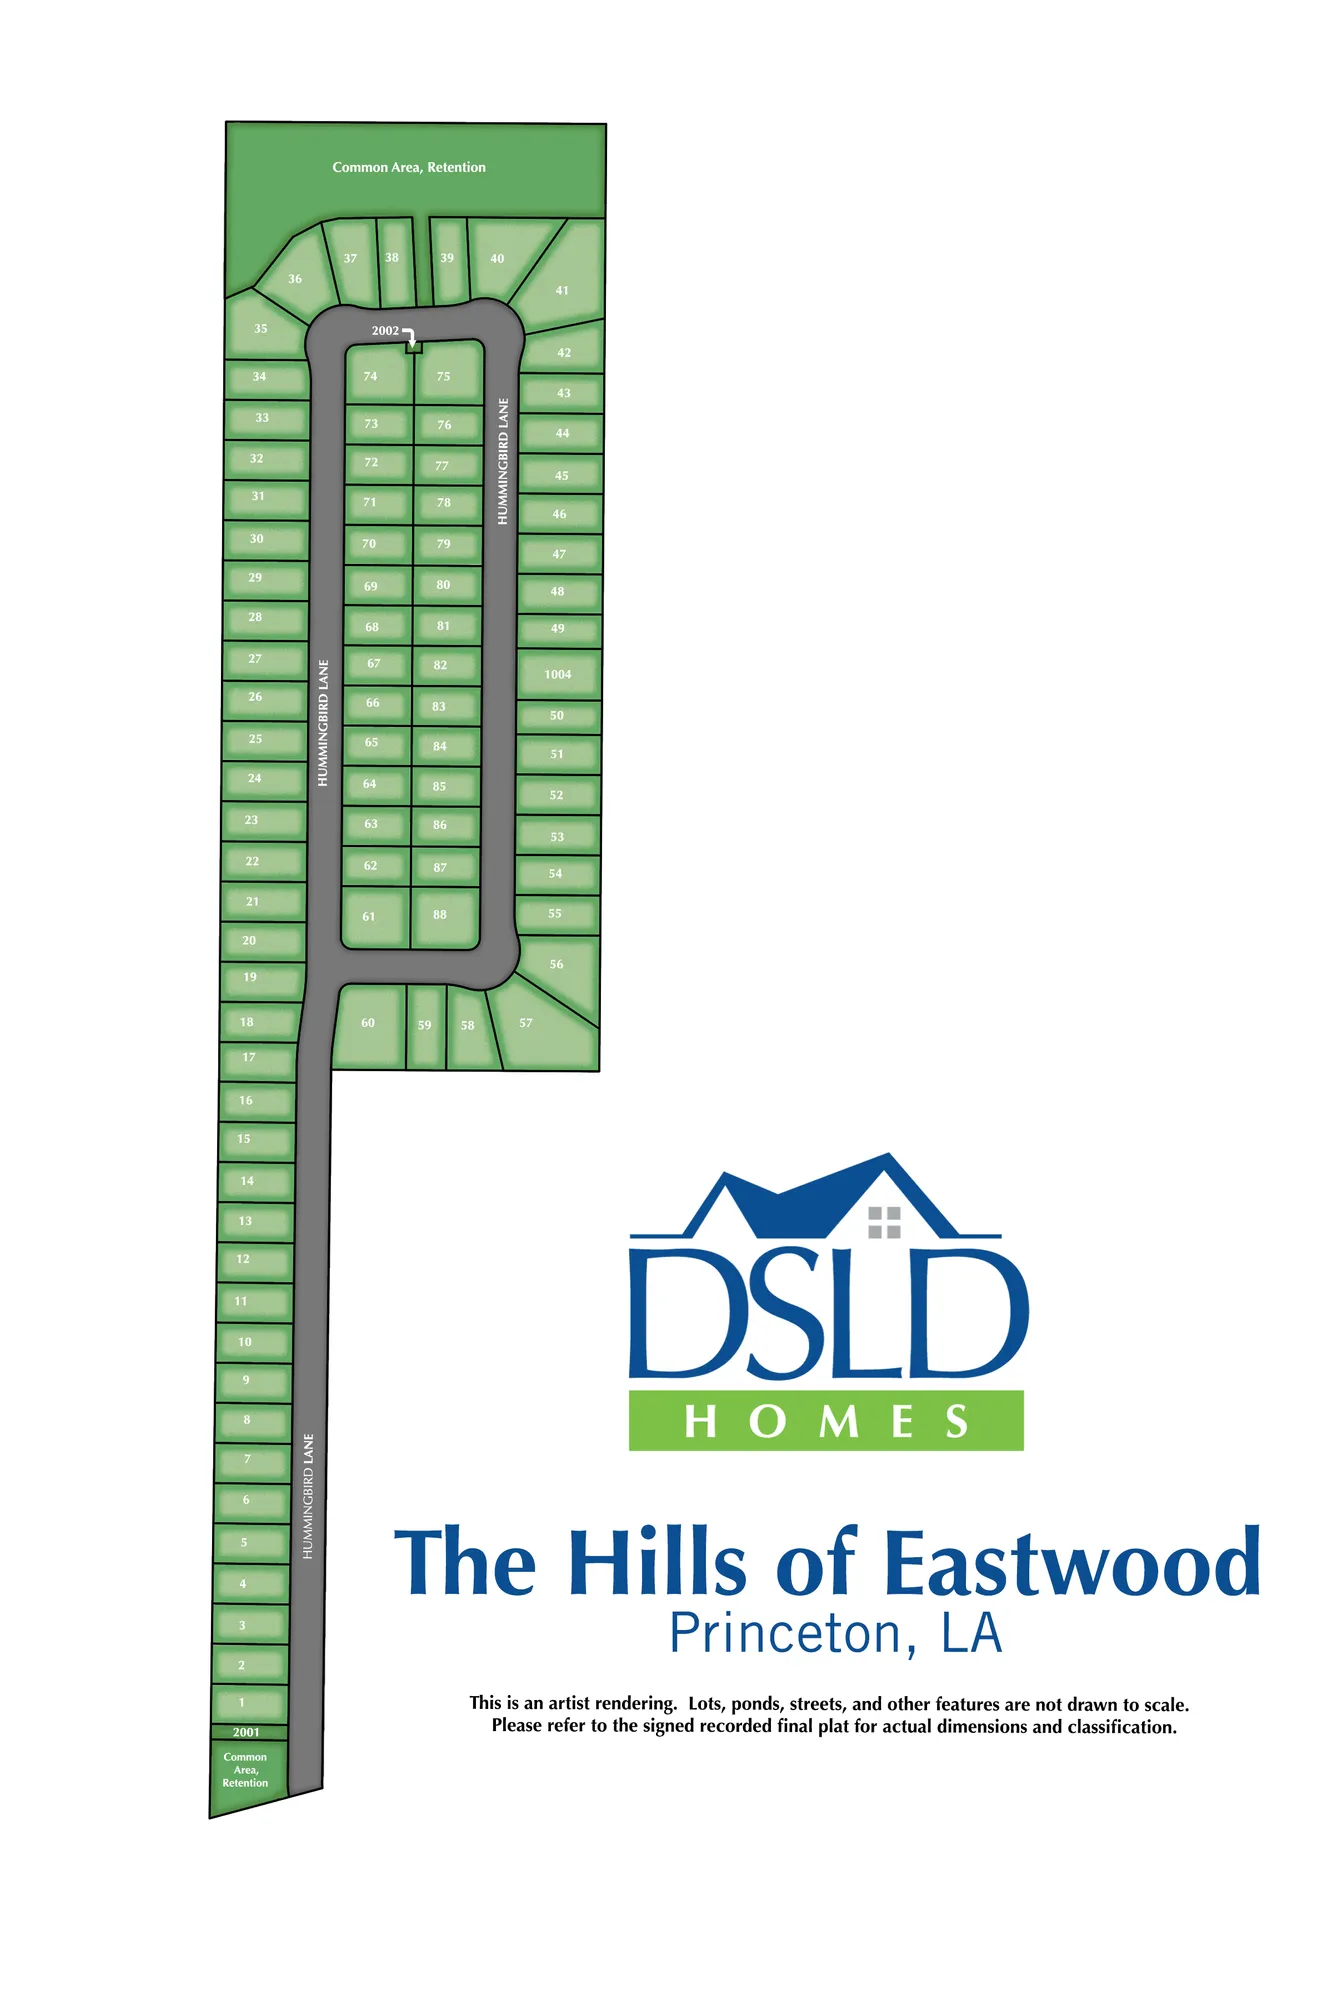 The Hills of Eastwood